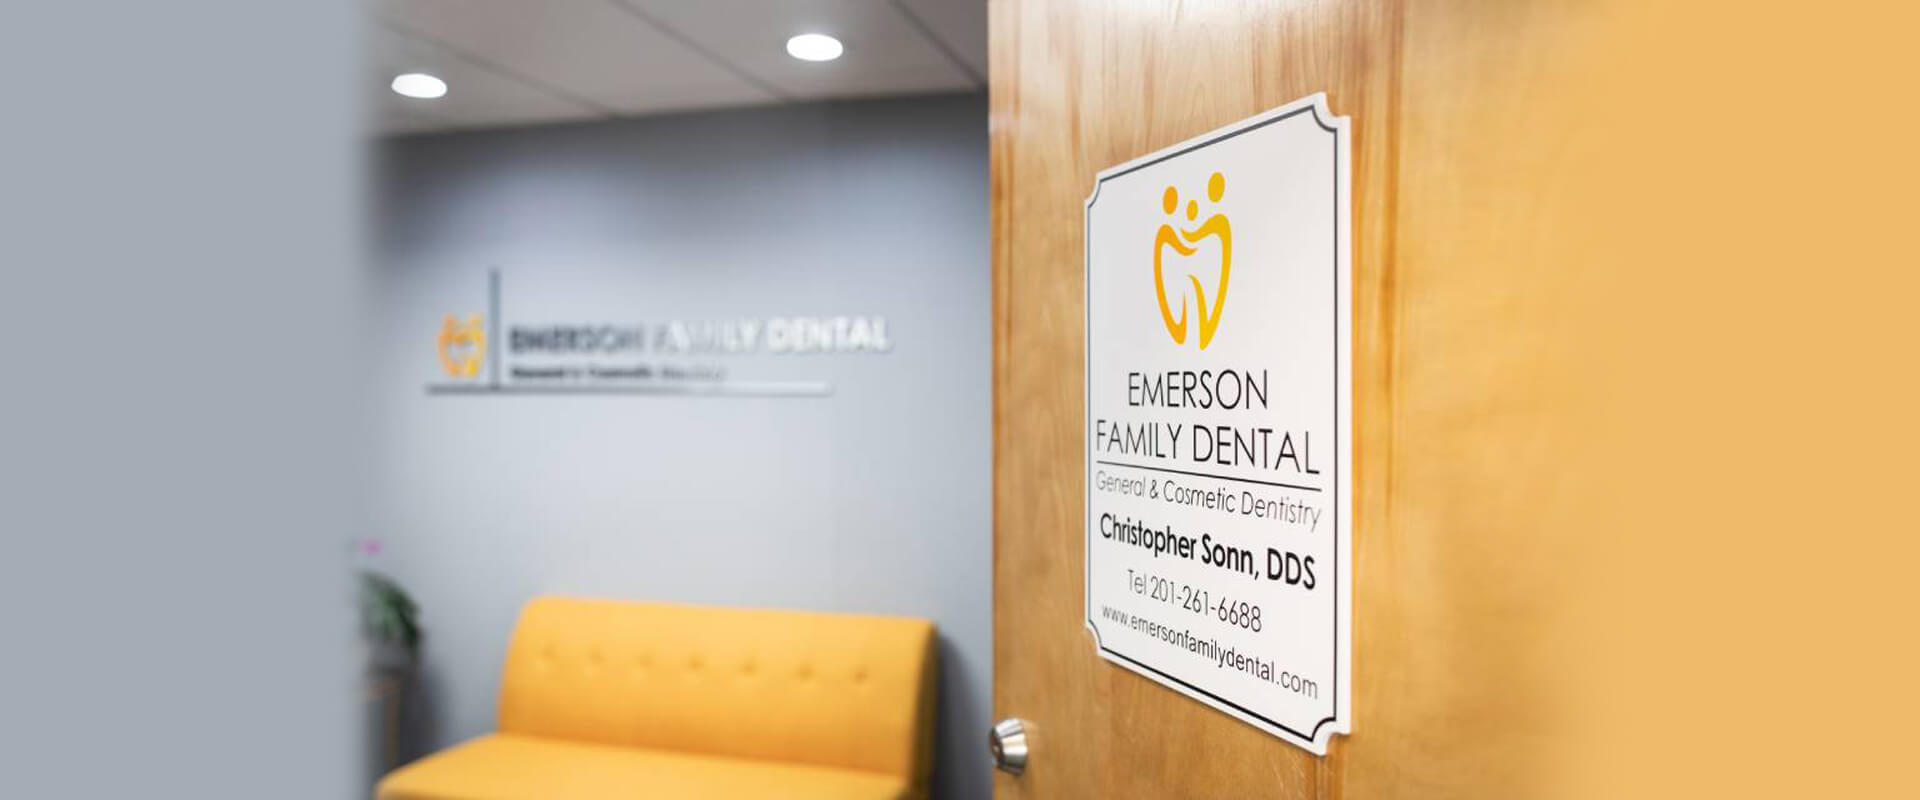 Welcome to Emerson Family Dental!